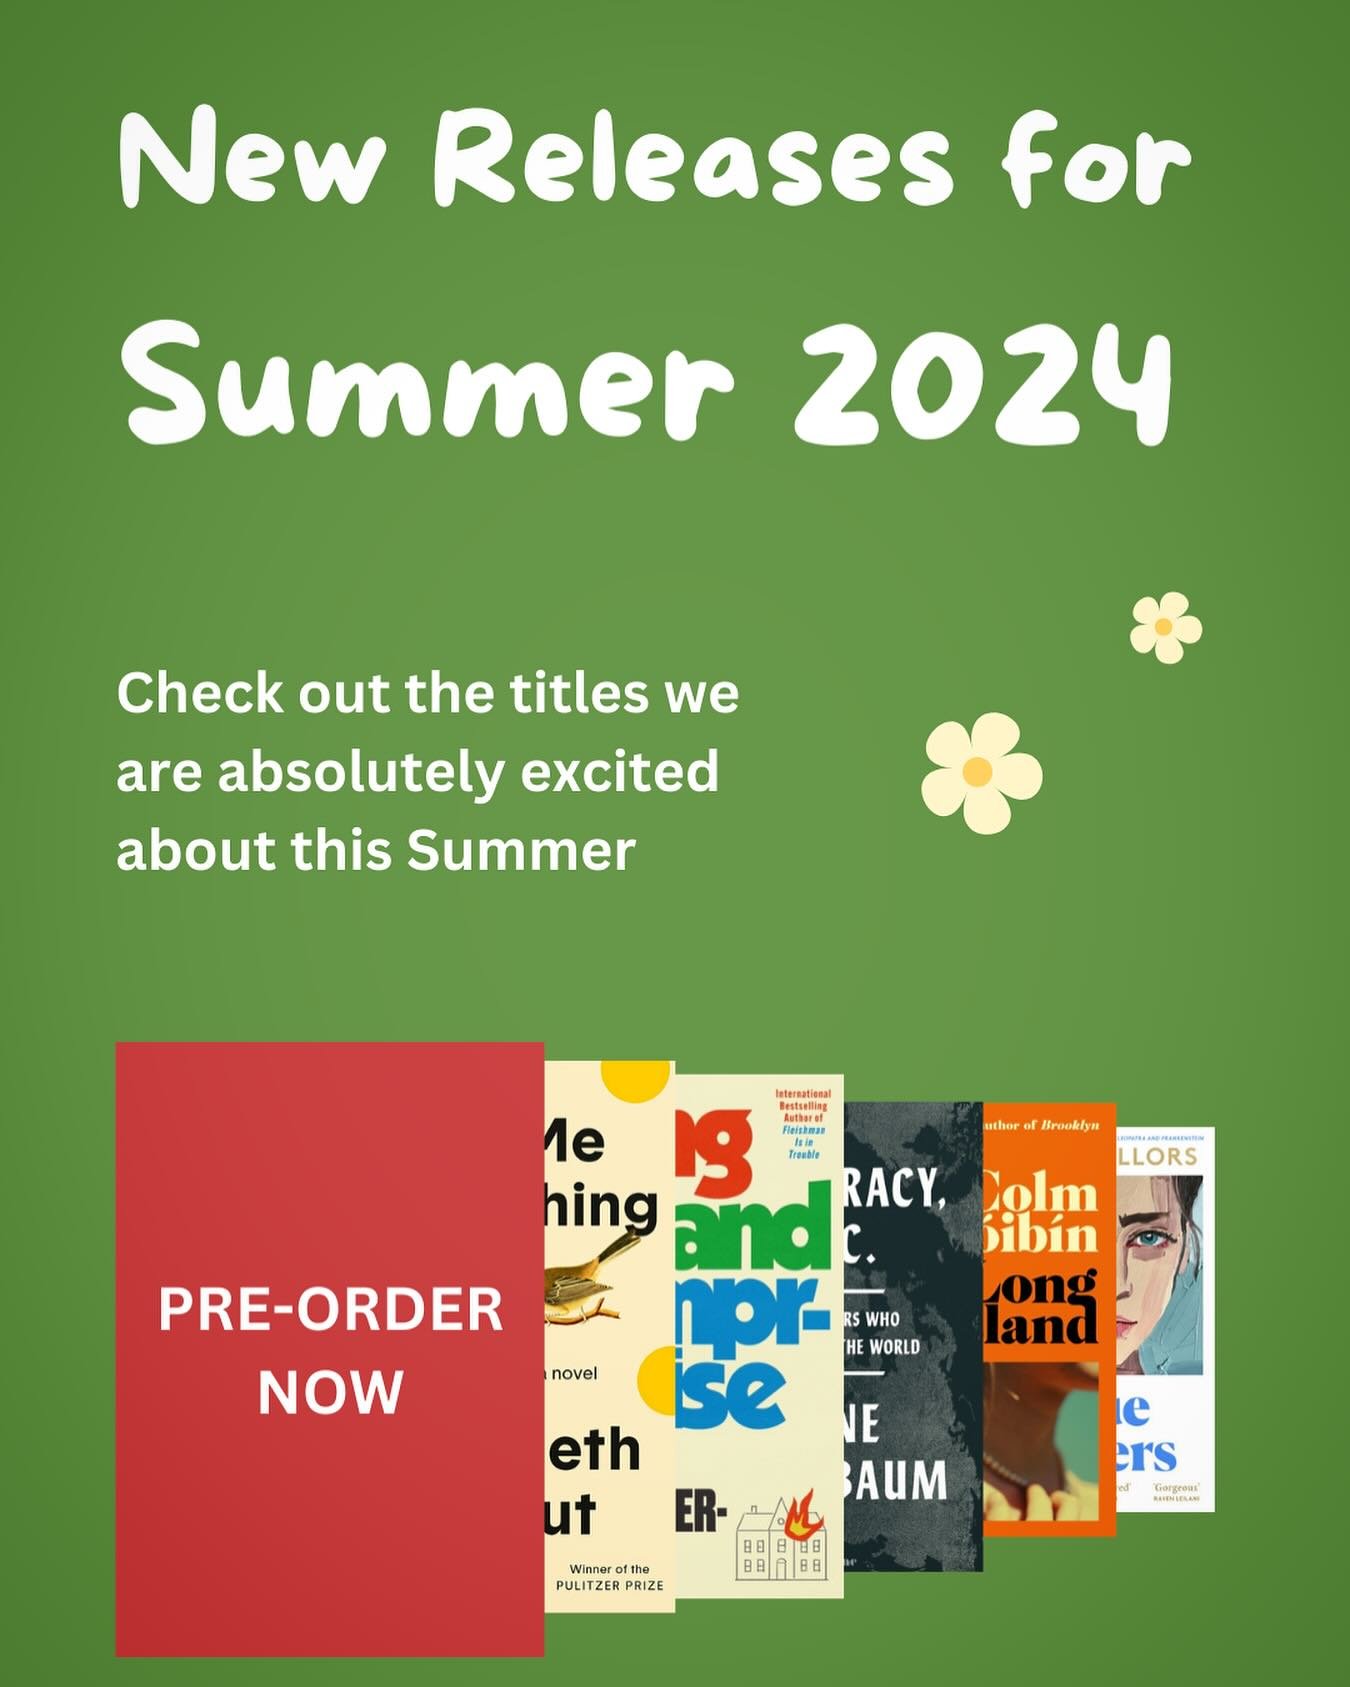 Happy sunny Thursday ☀️

We are thrilled to bring you the second installment of our &lsquo;New Releases&rsquo; newsletter. 

At Books &amp; Company, we are always keen to bring you a great selection of fiction and non-fiction, and to make sure we kno